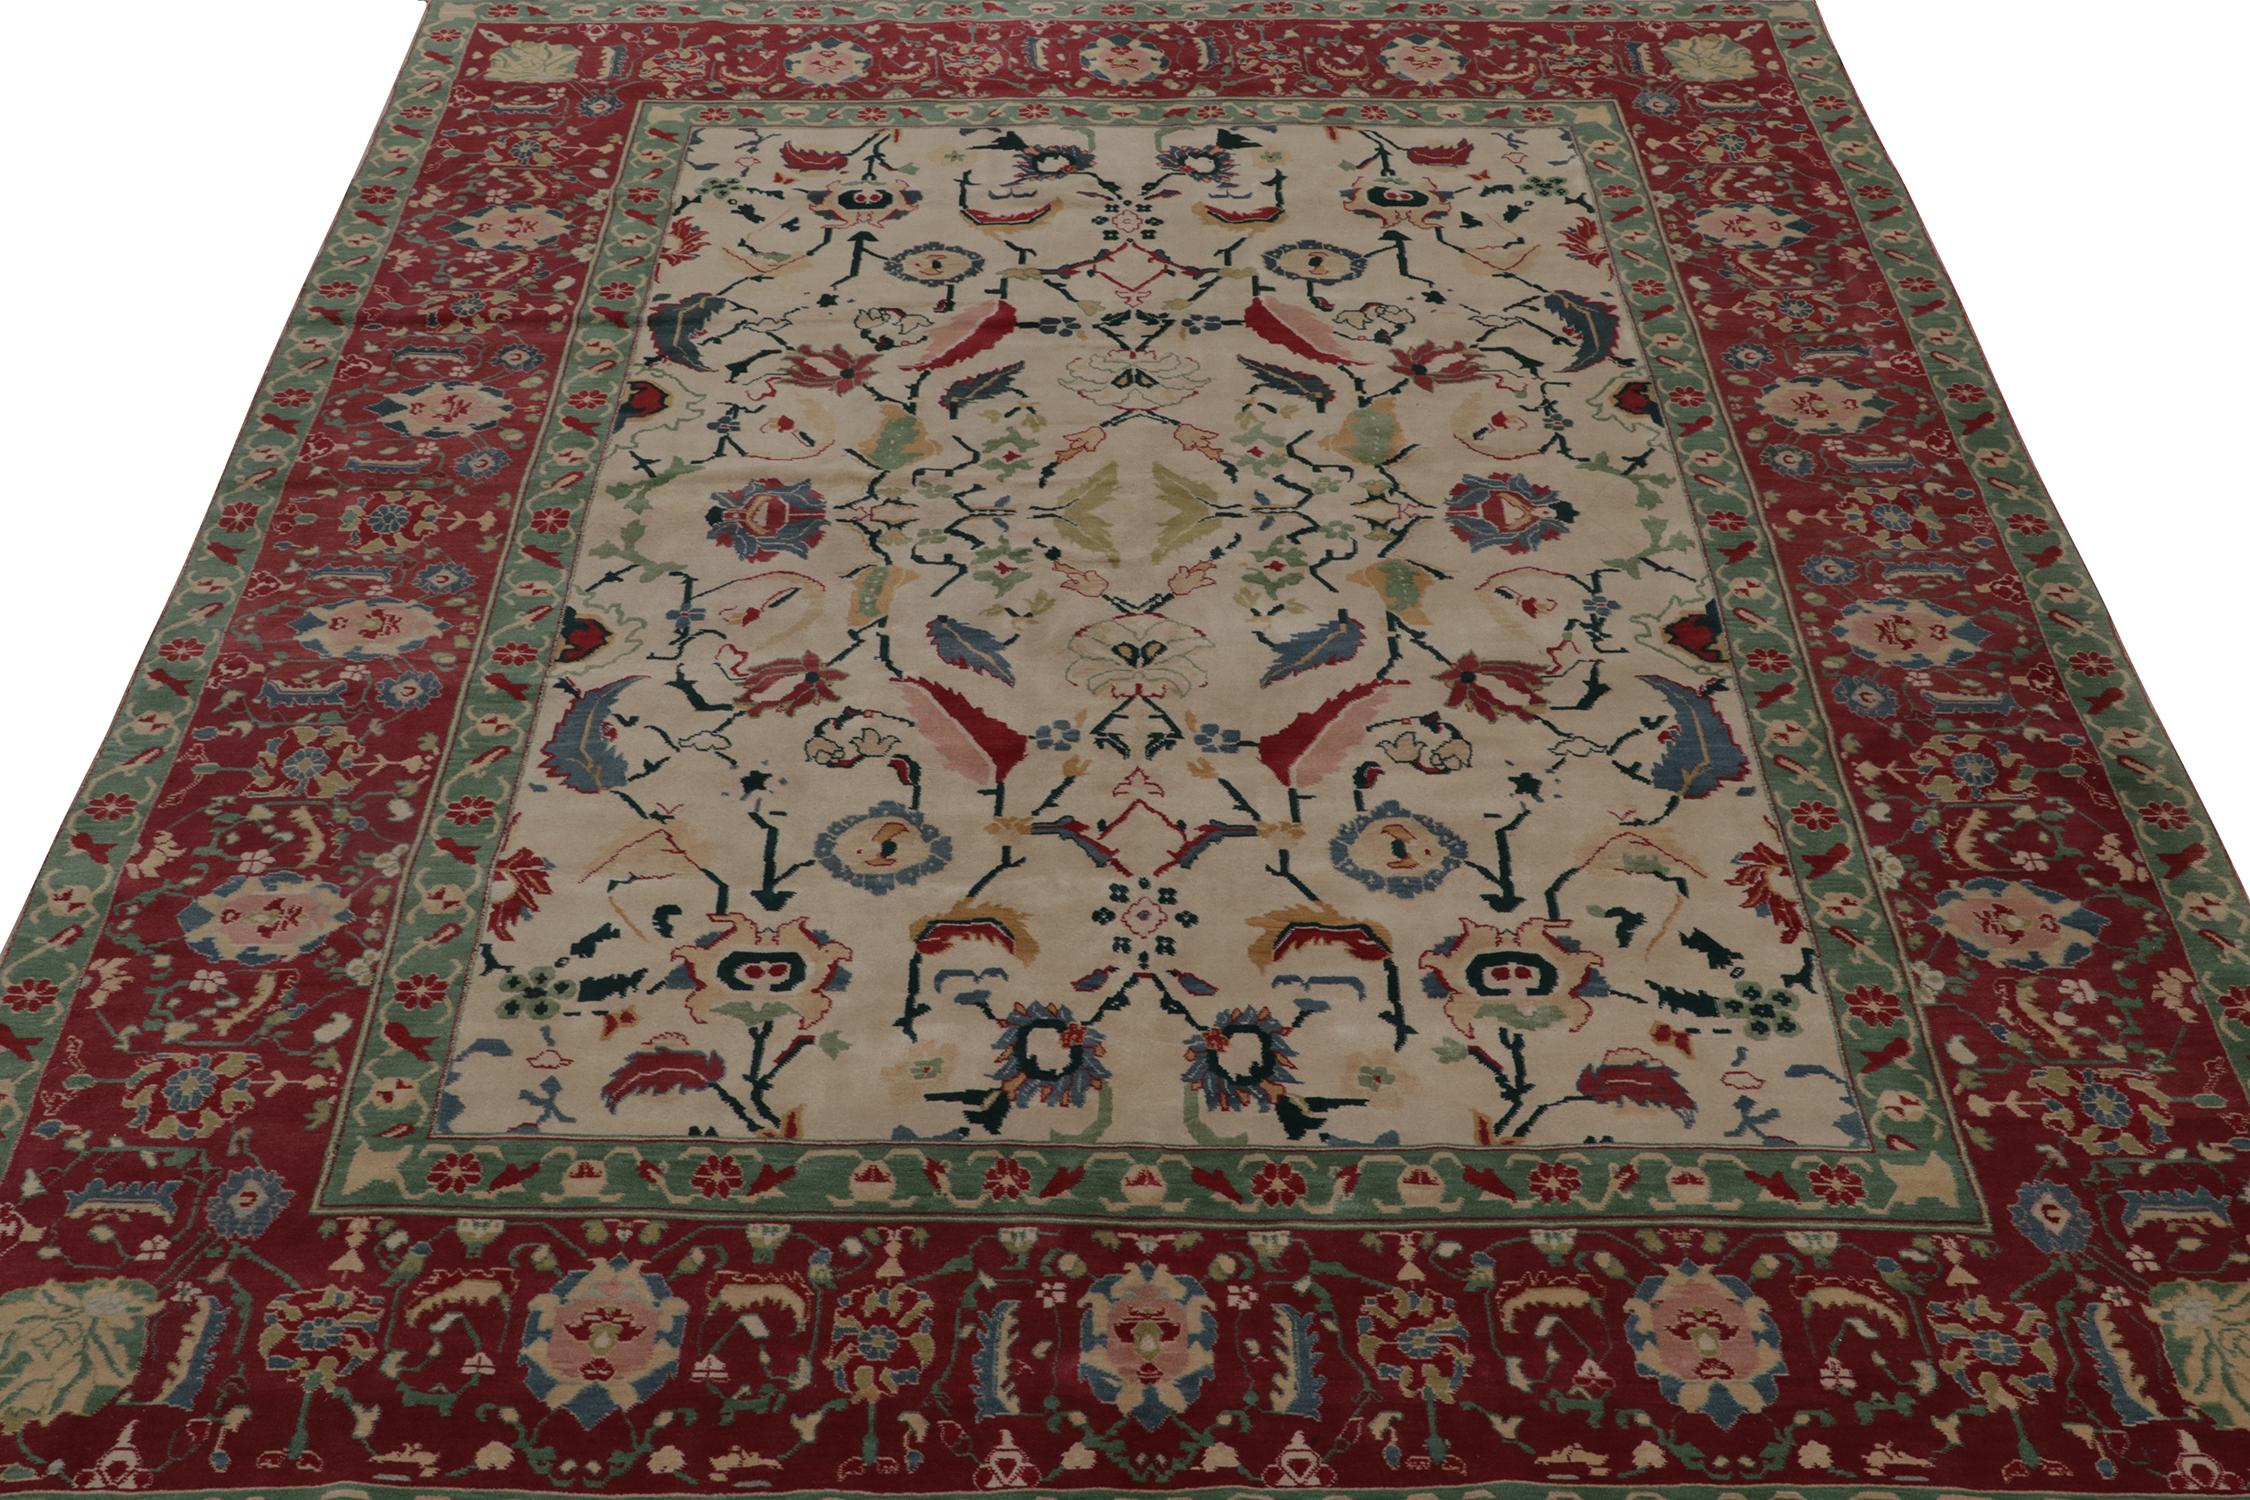 Indian Rug & Kilim’s Traditional Agra style rug in Beige, Red and Teal Floral Pattern For Sale